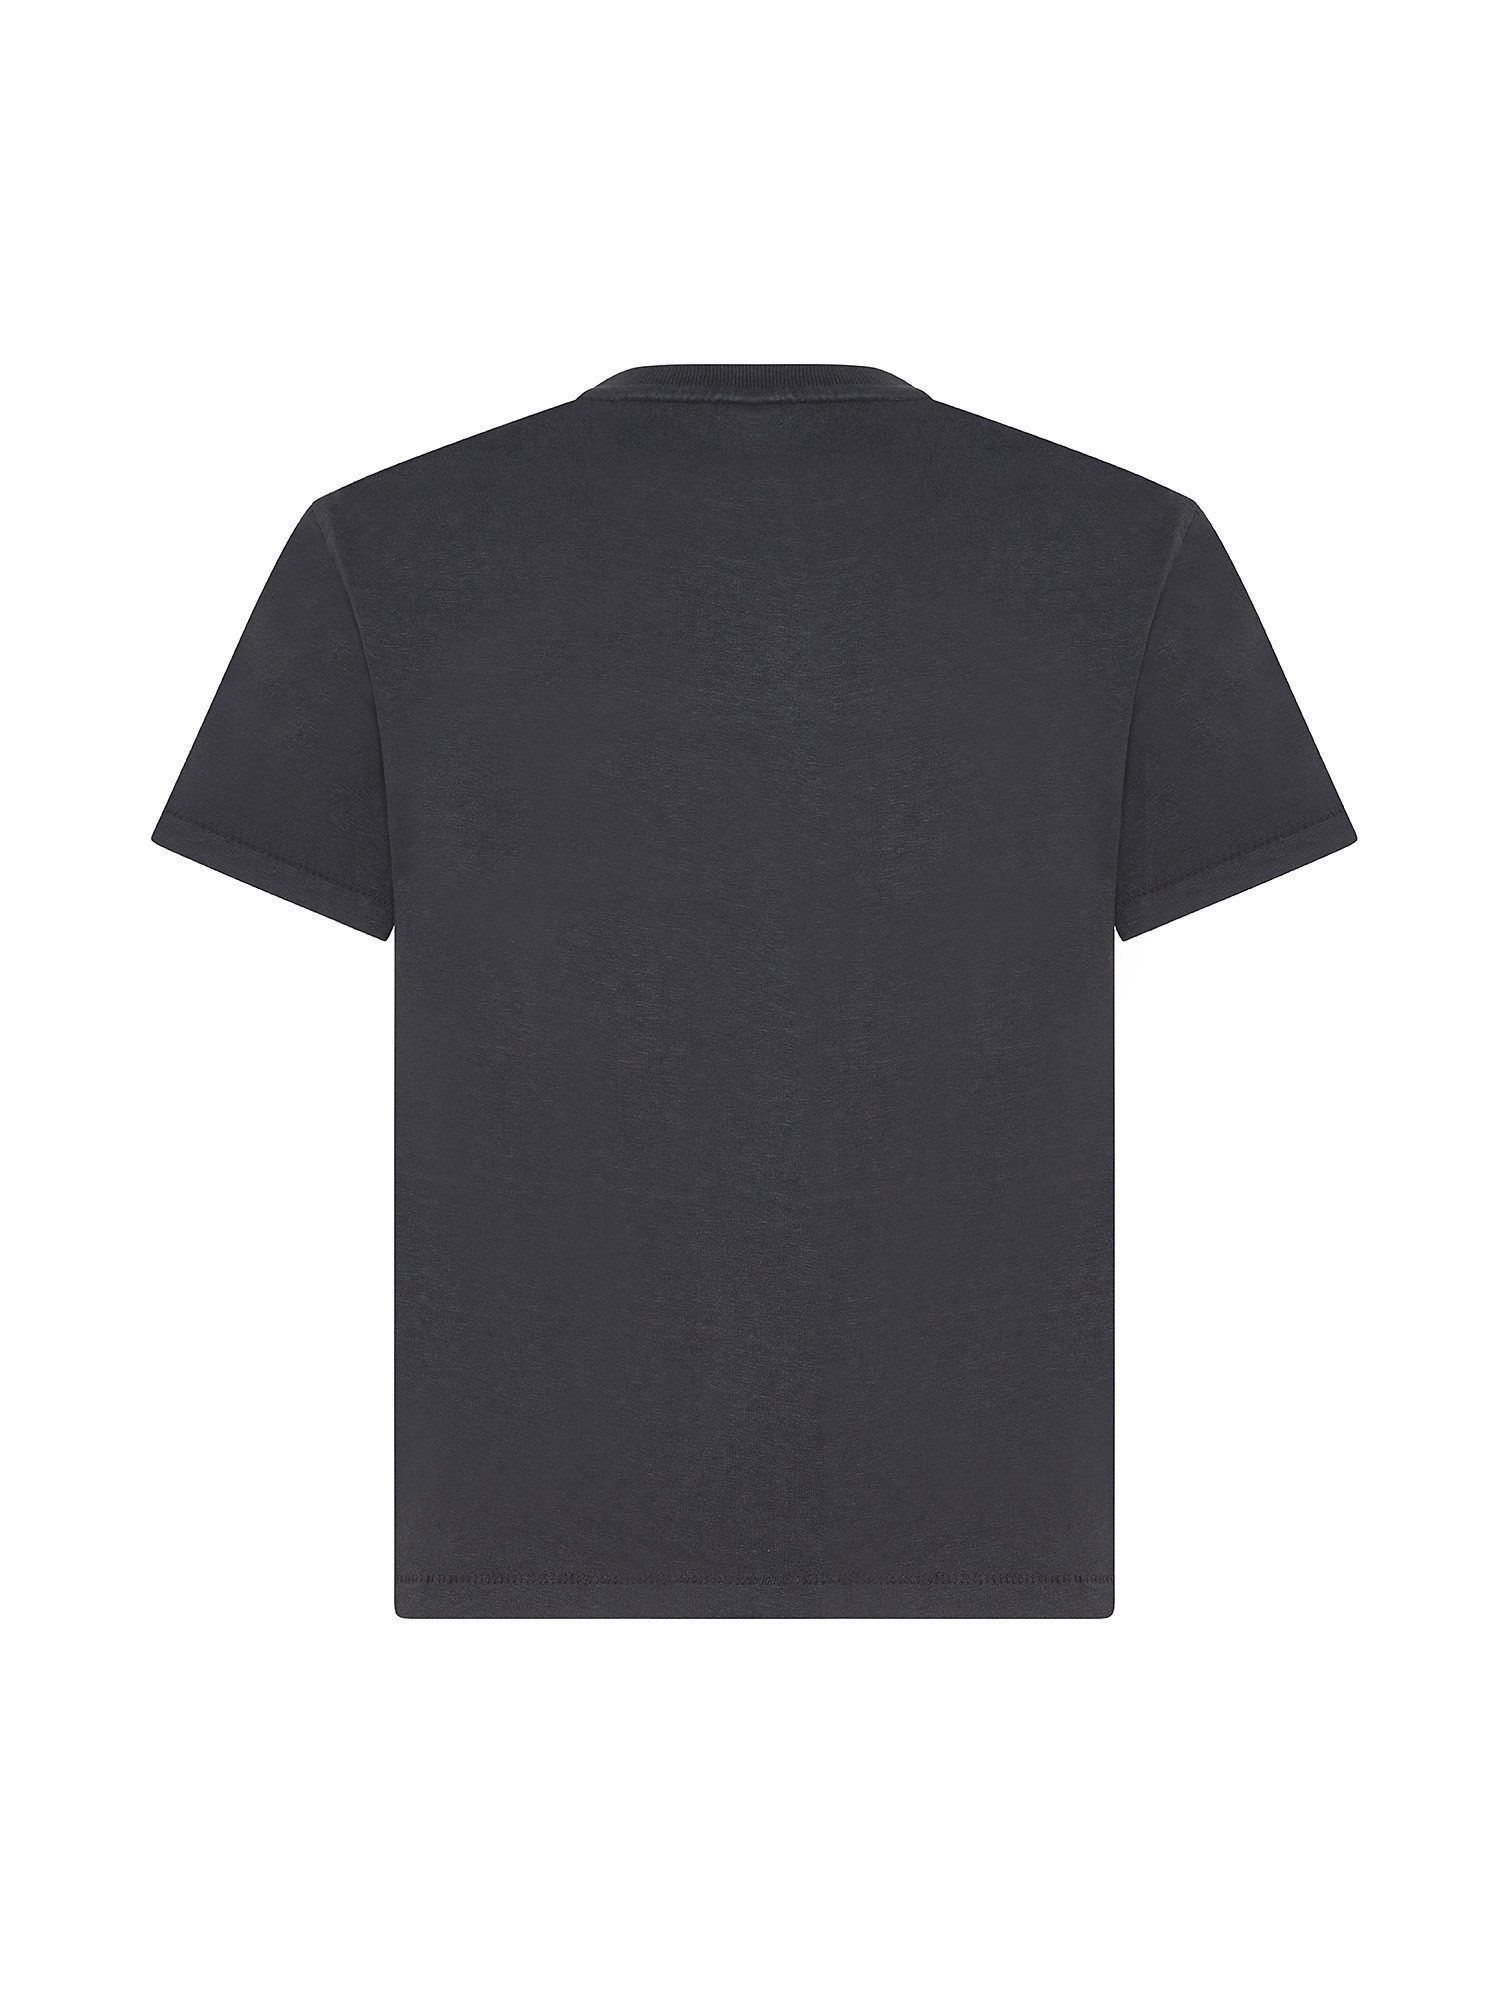 Levi's - T-shirt classic fit, Nero, large image number 1